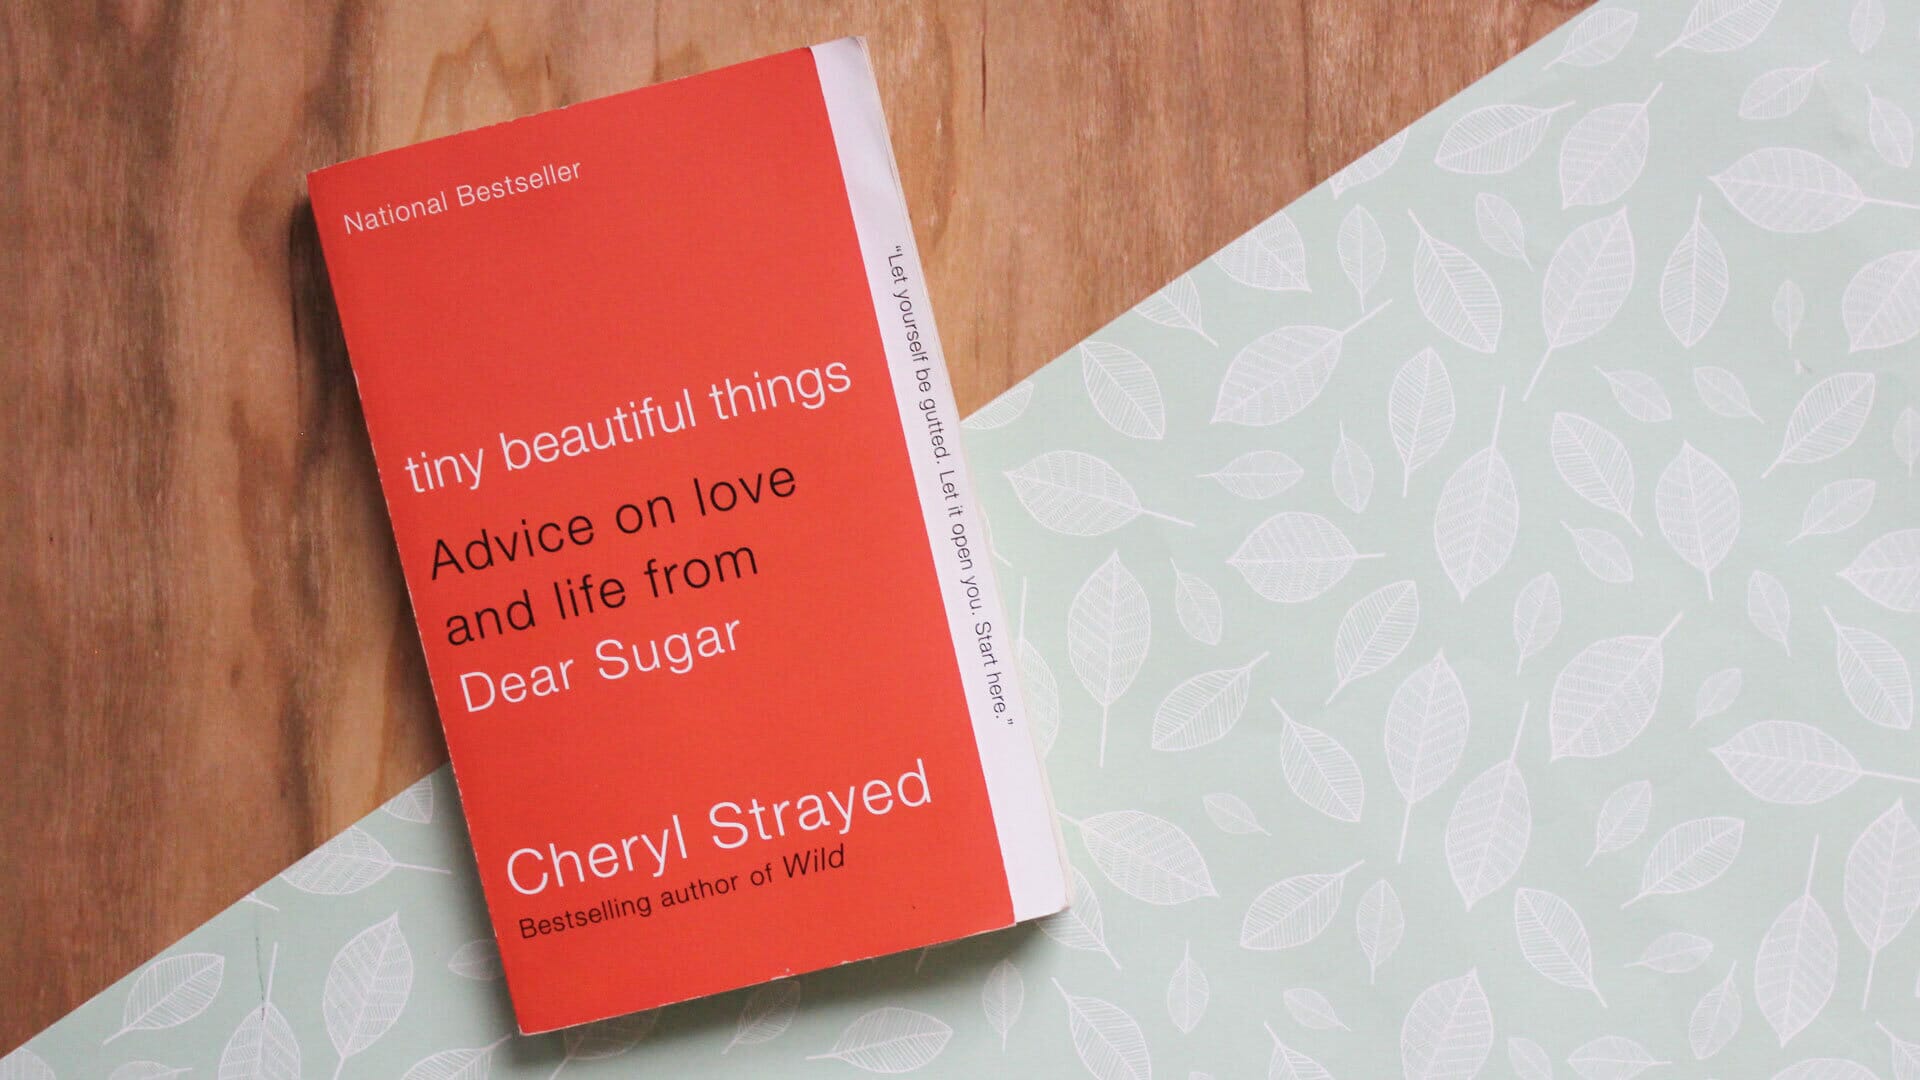 tiny beautiful things advice on love and life from dear sugar by cheryl strayed